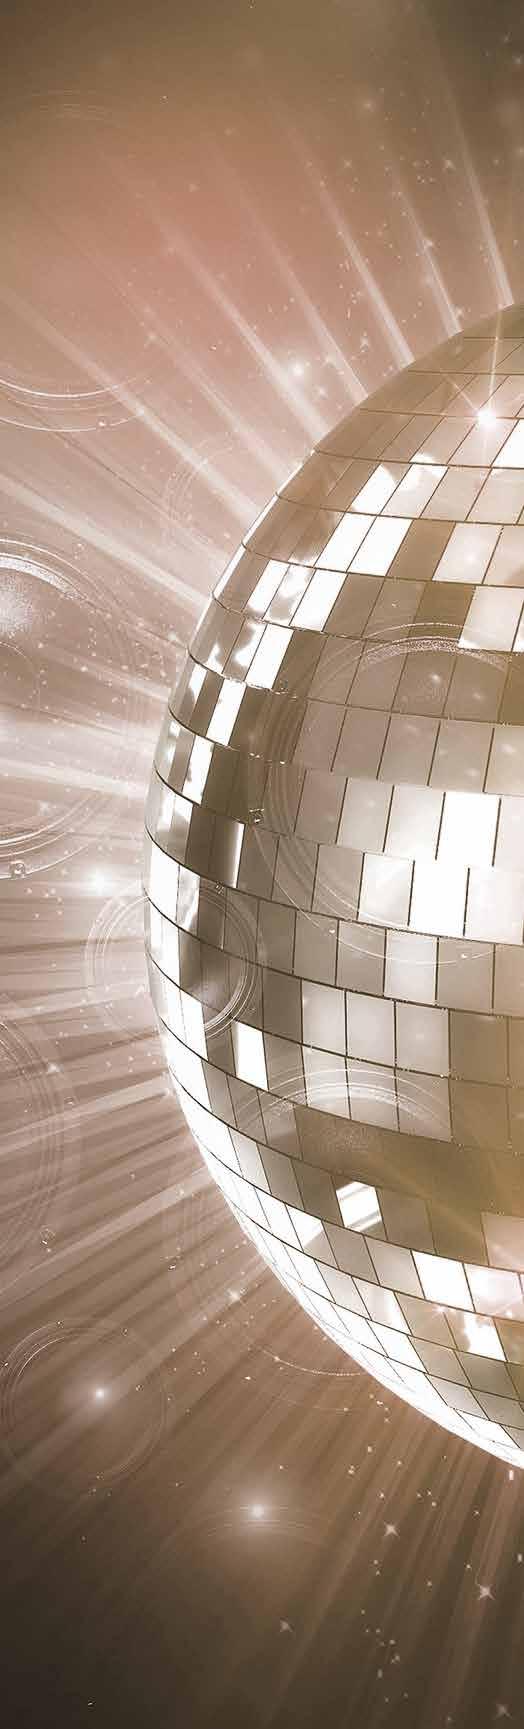 Christmas Party Nights Boogie Nights It s disco glam in our themed Boogie Nights Christmas parties this year with full table dinner service, a host of classic 70 s & 80 s tracks & large dance floor,